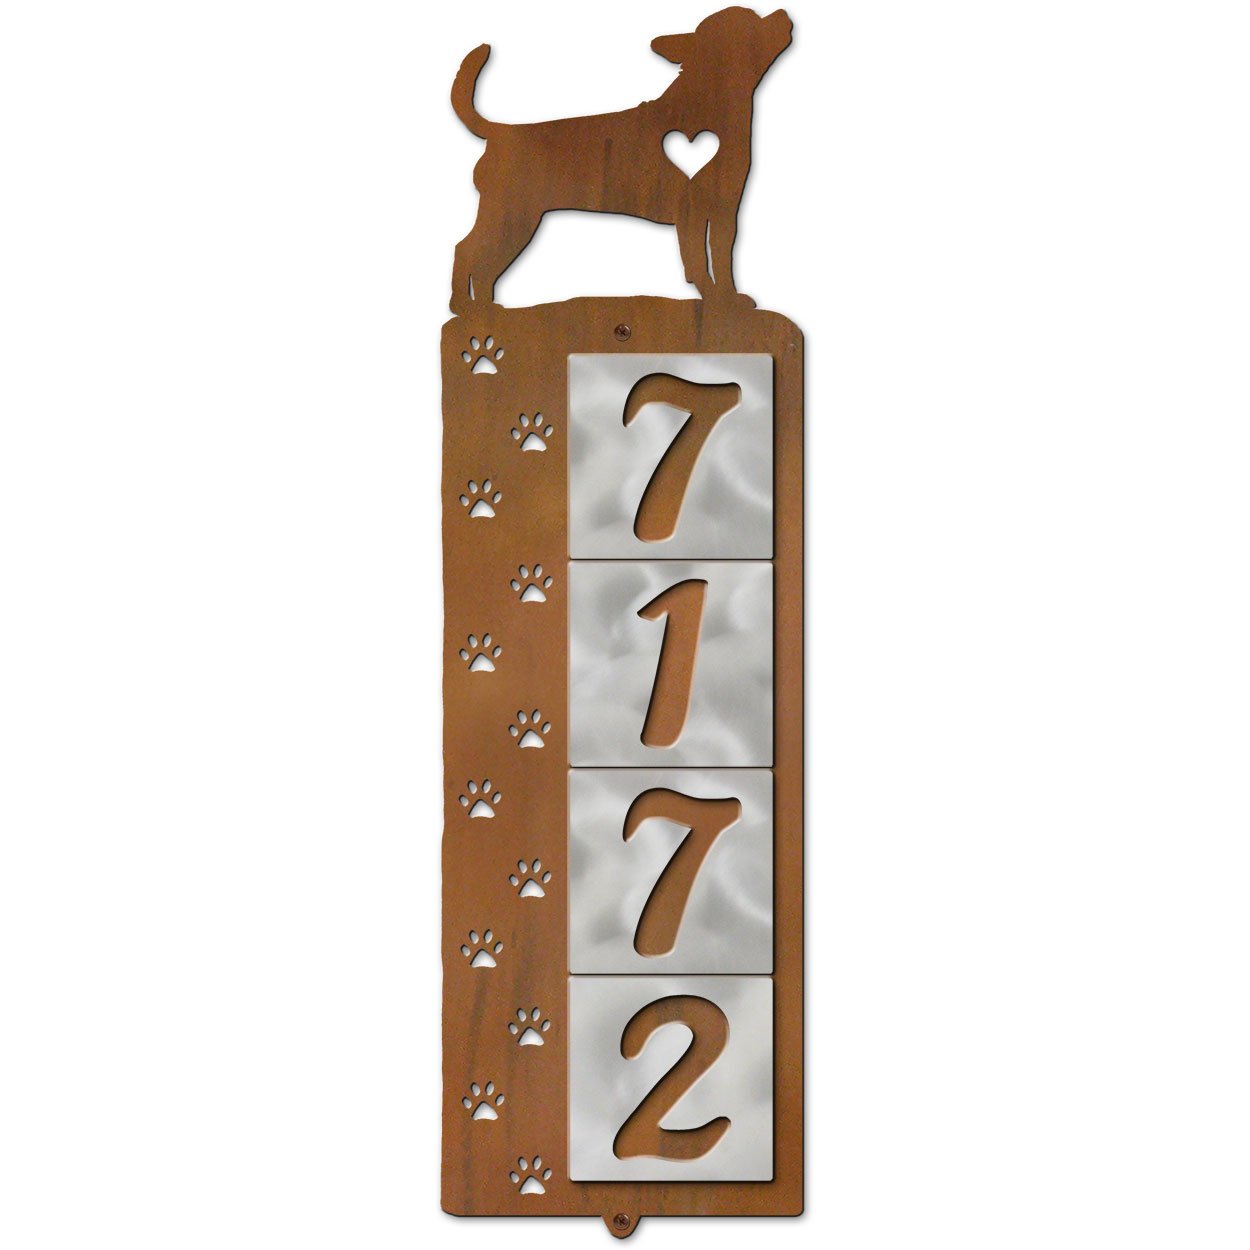 606174 - Chihuahua Dog Tracks 4-Digit Vertical House Numbers